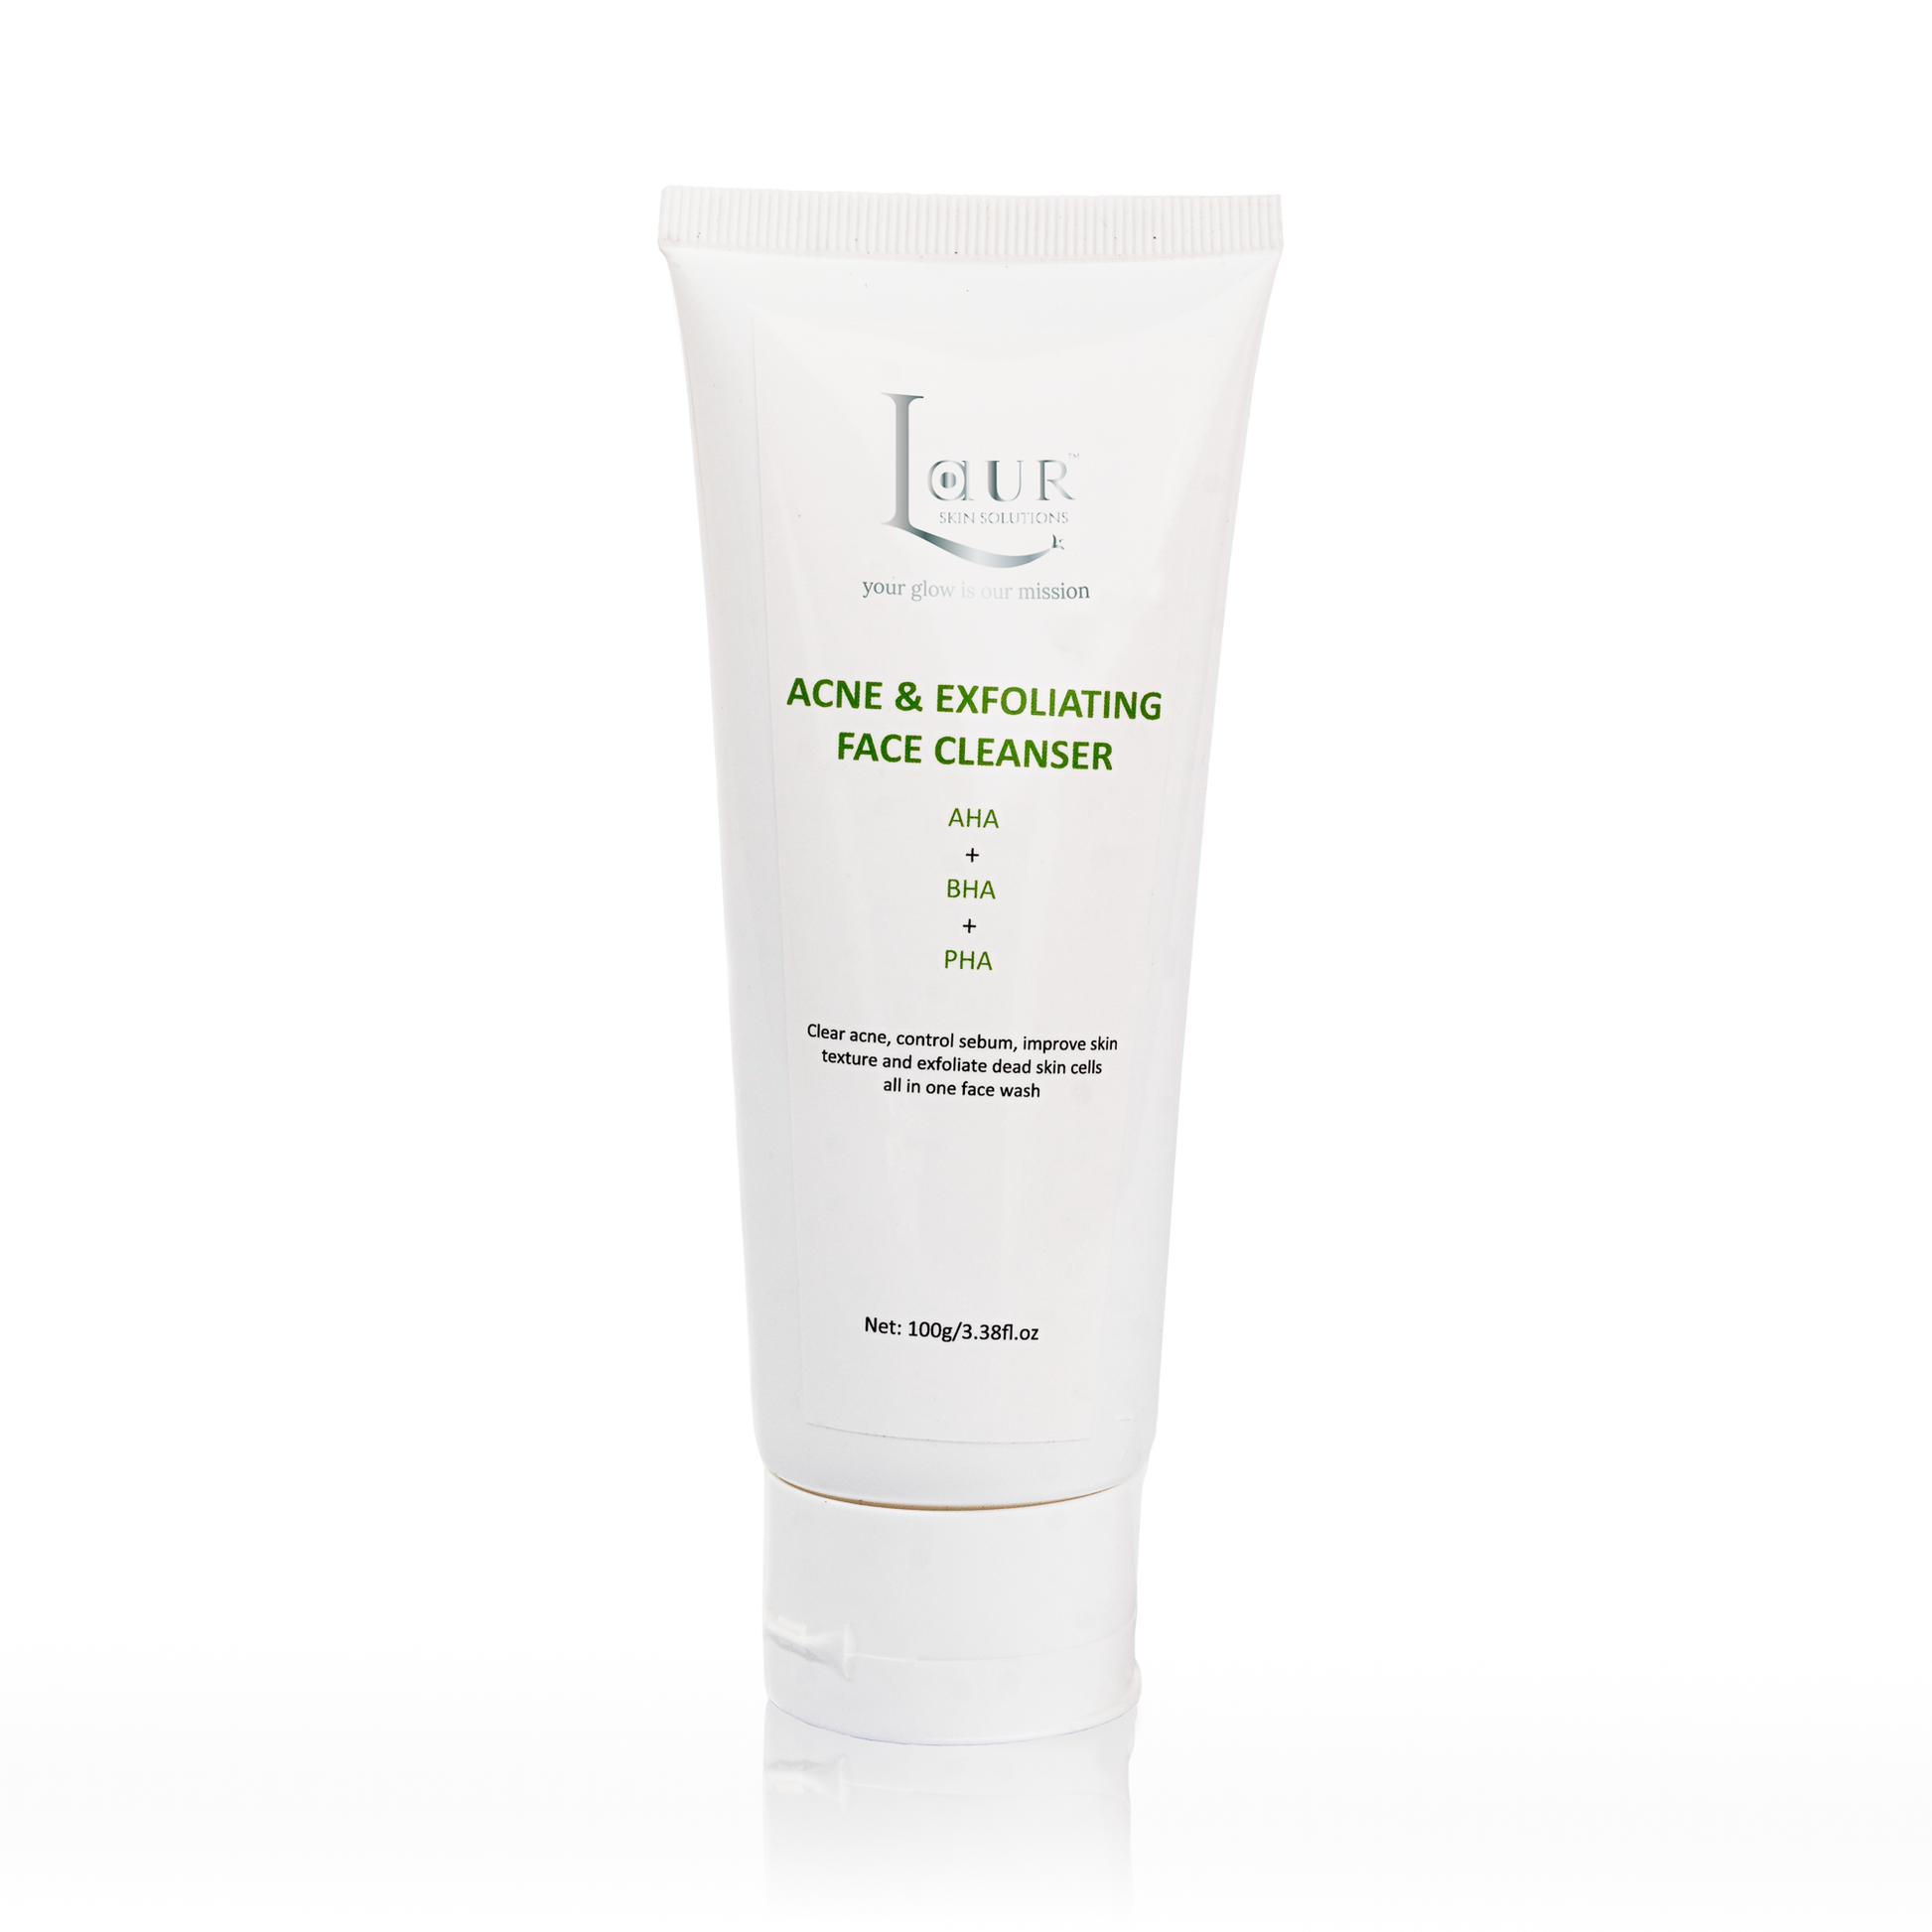 ACNE & EXFOLIATING FACE CLEANSER | Laur Skin Solutions